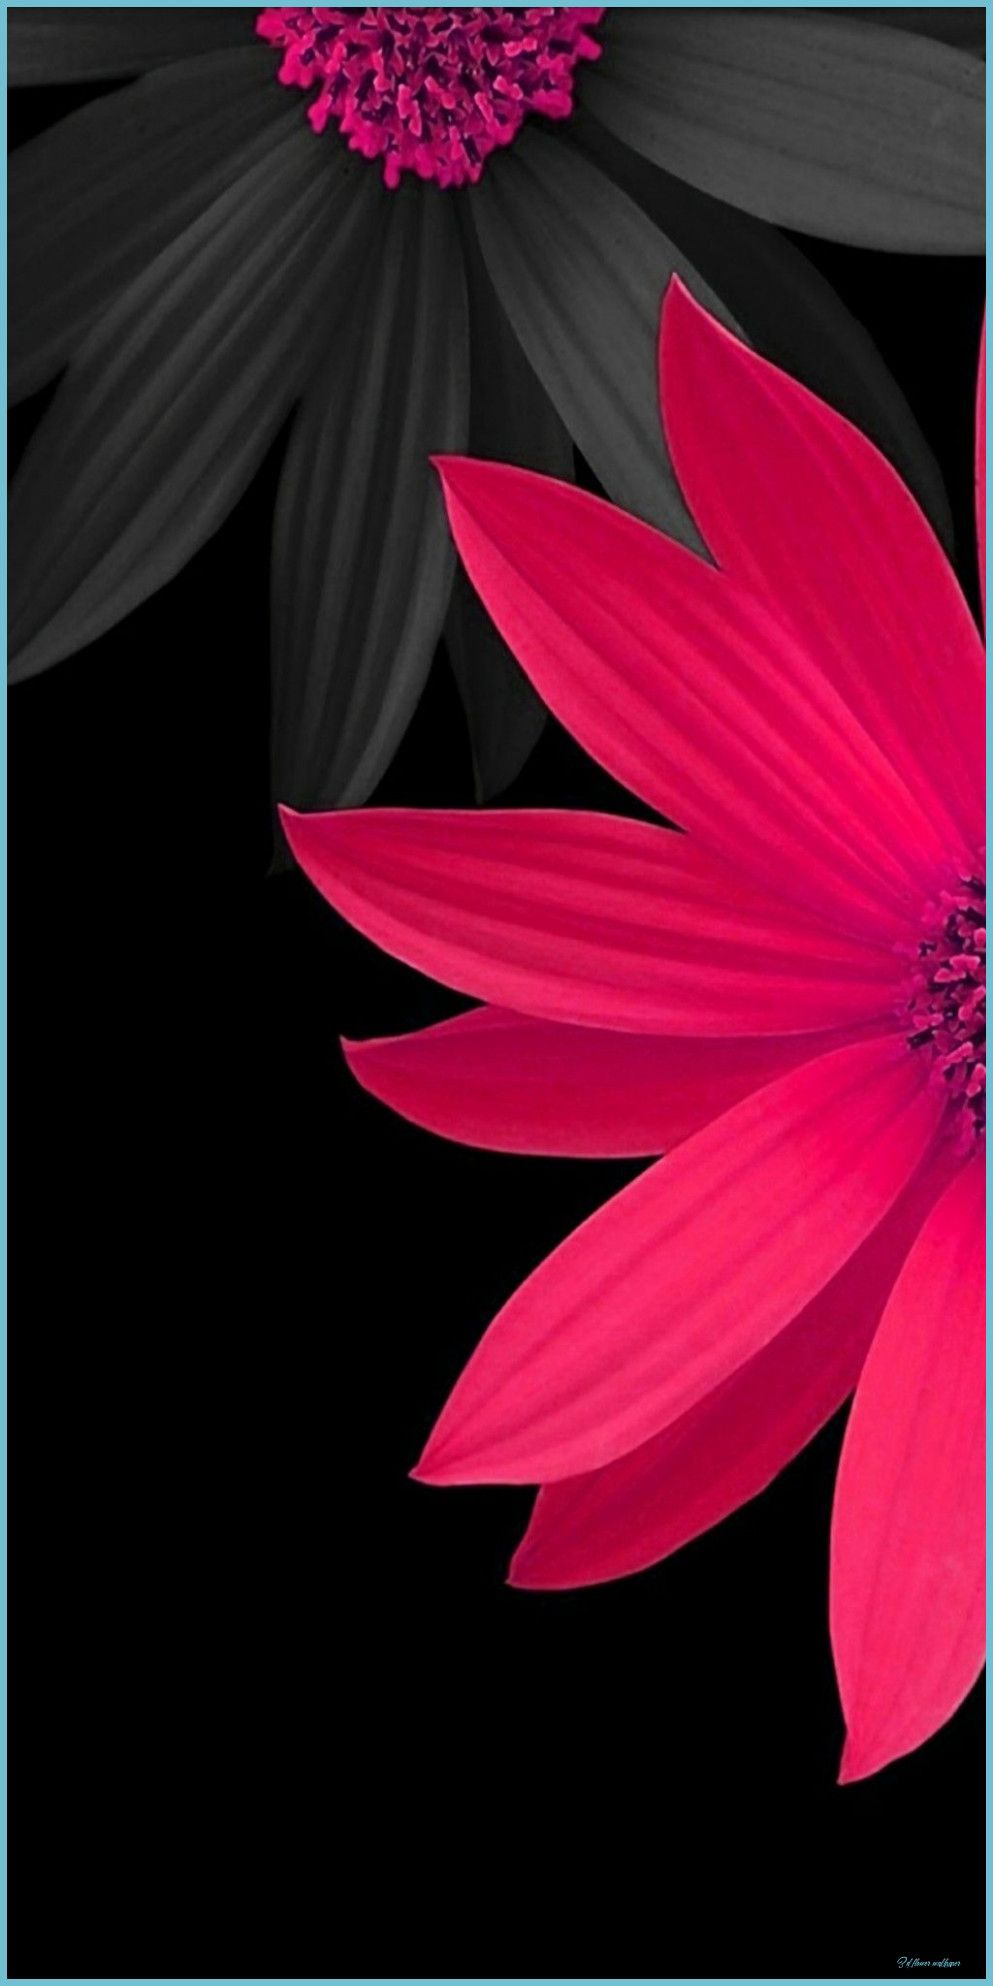 Pink And Black 9D Flowers Wallpaper Pink Flowers Wallpaper Flower Wallpaper